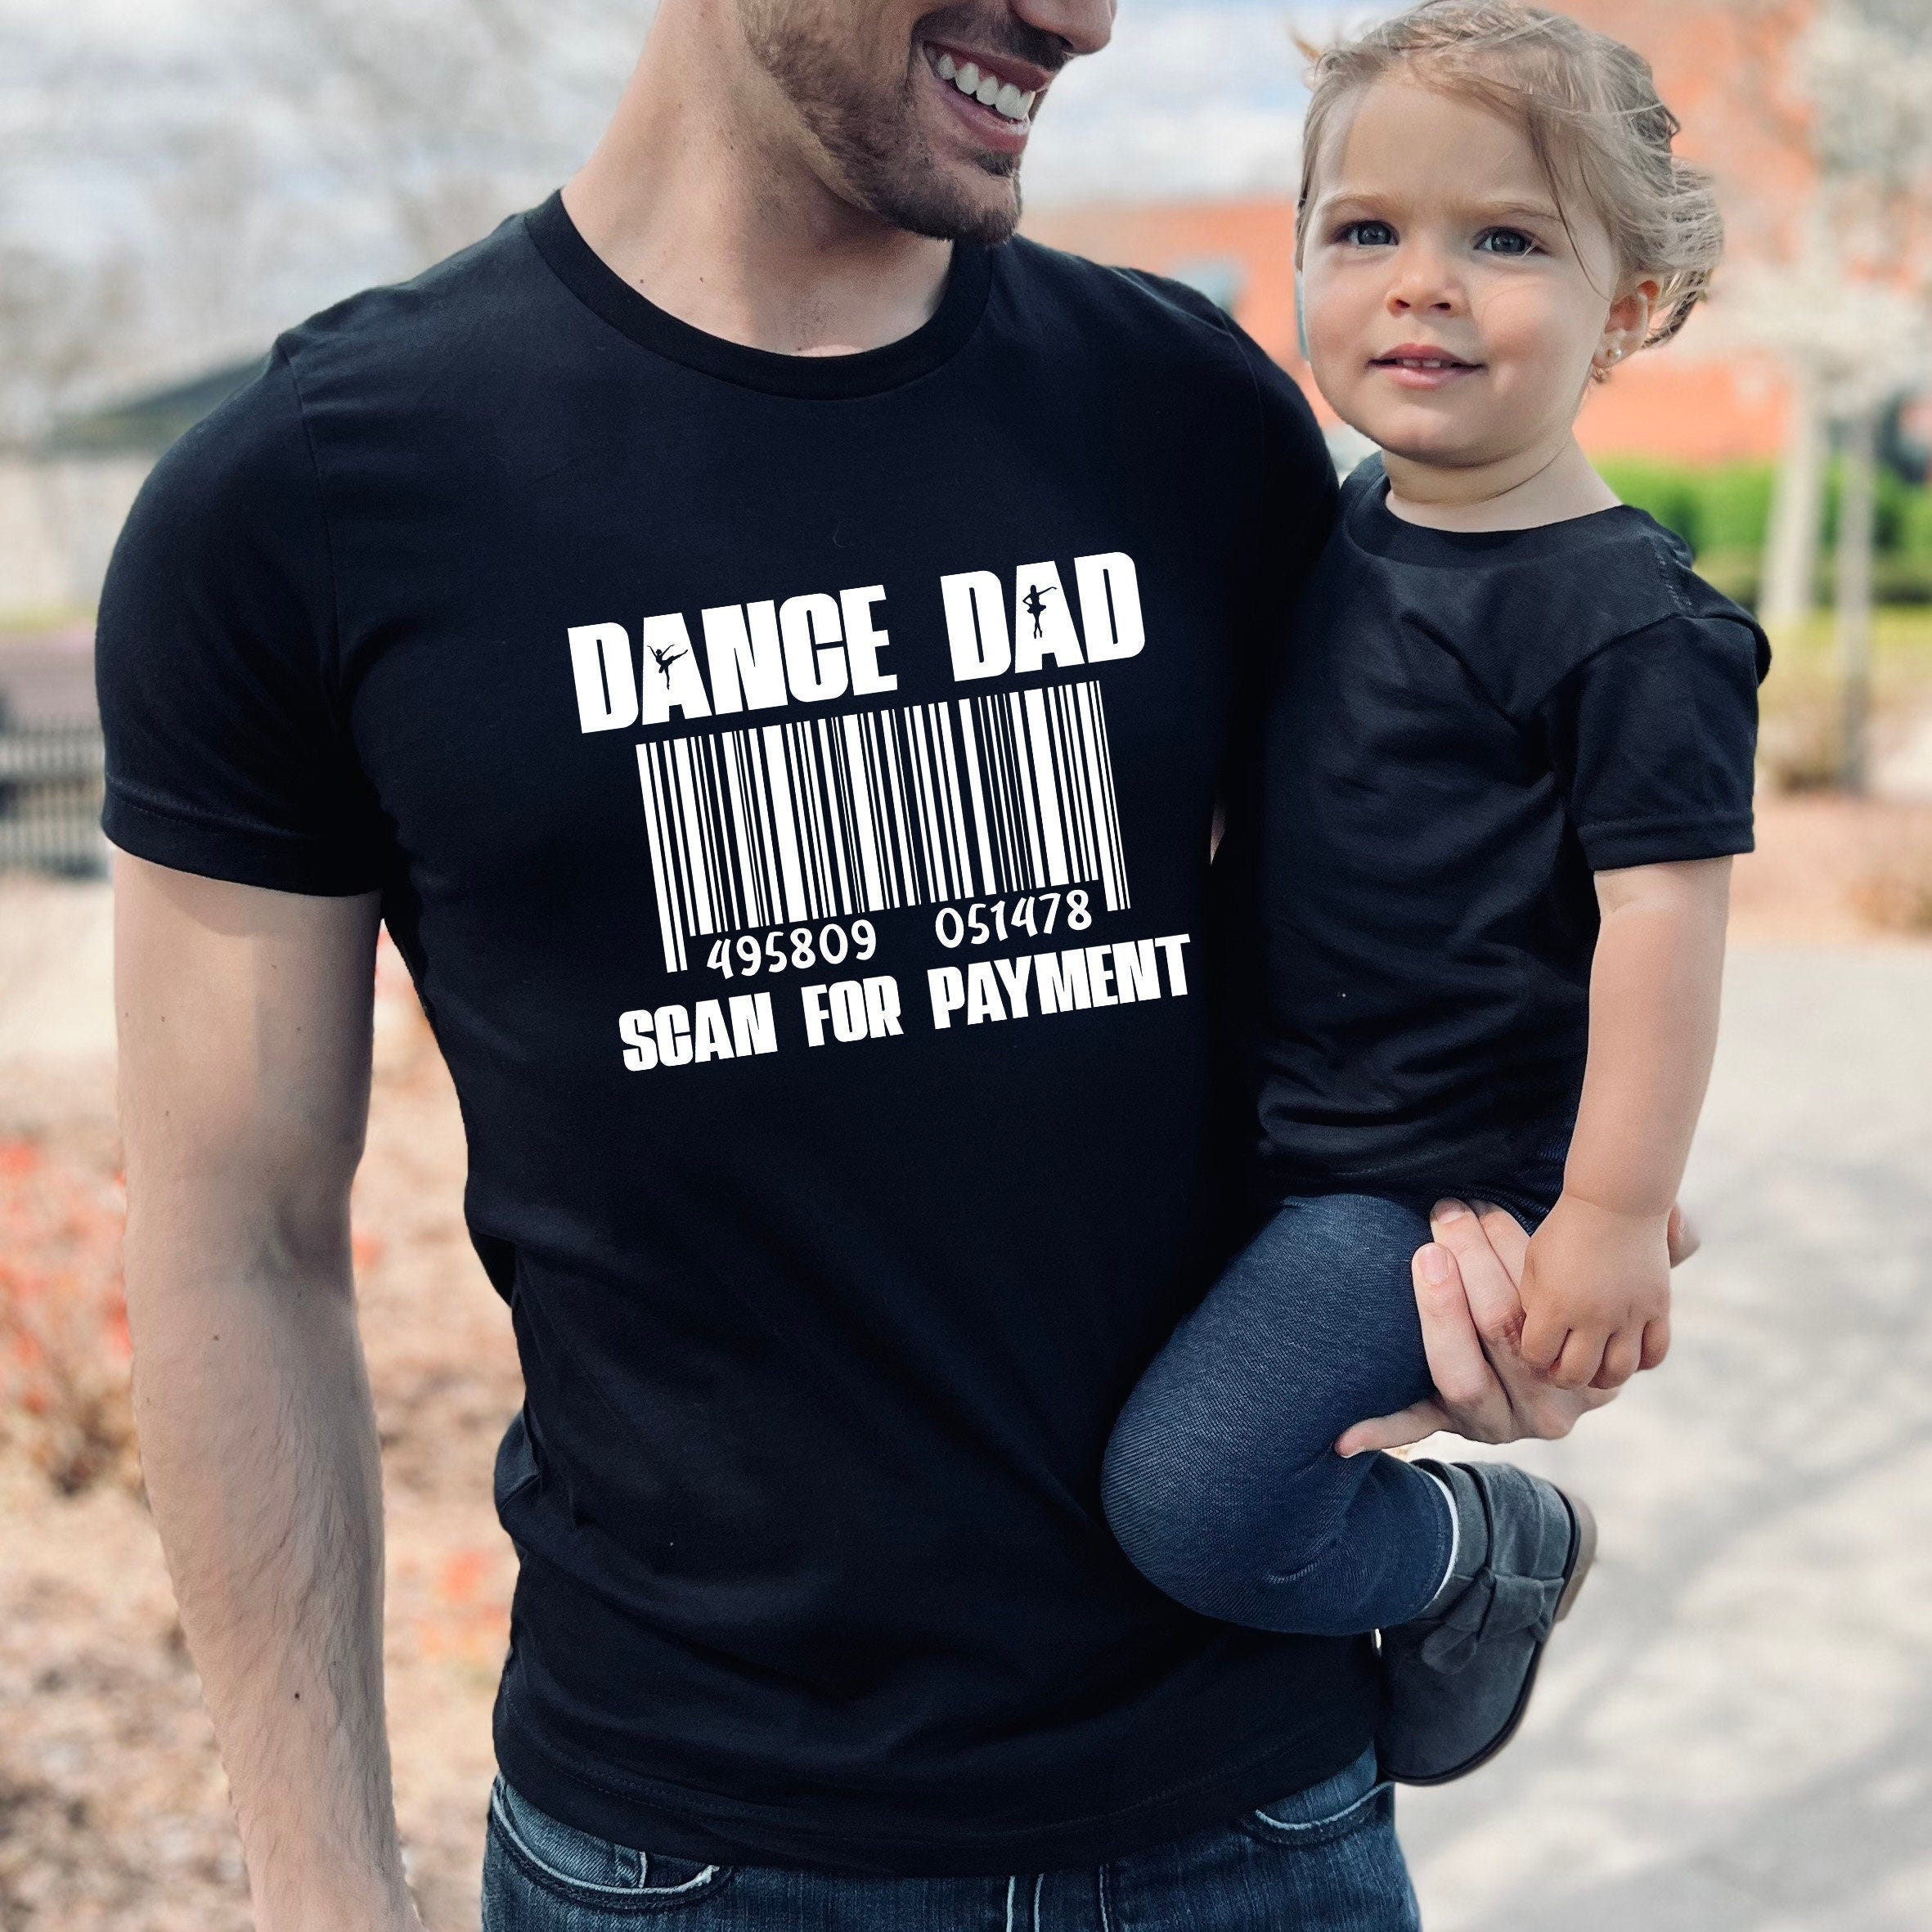 Dance Dad Scan For Payment, Dancer Dad Shirt, Fathers Day Shirt, Funny Dance Shirt, Daddy Shirt, Gift For Daddy, Birthday Shirt For Dad